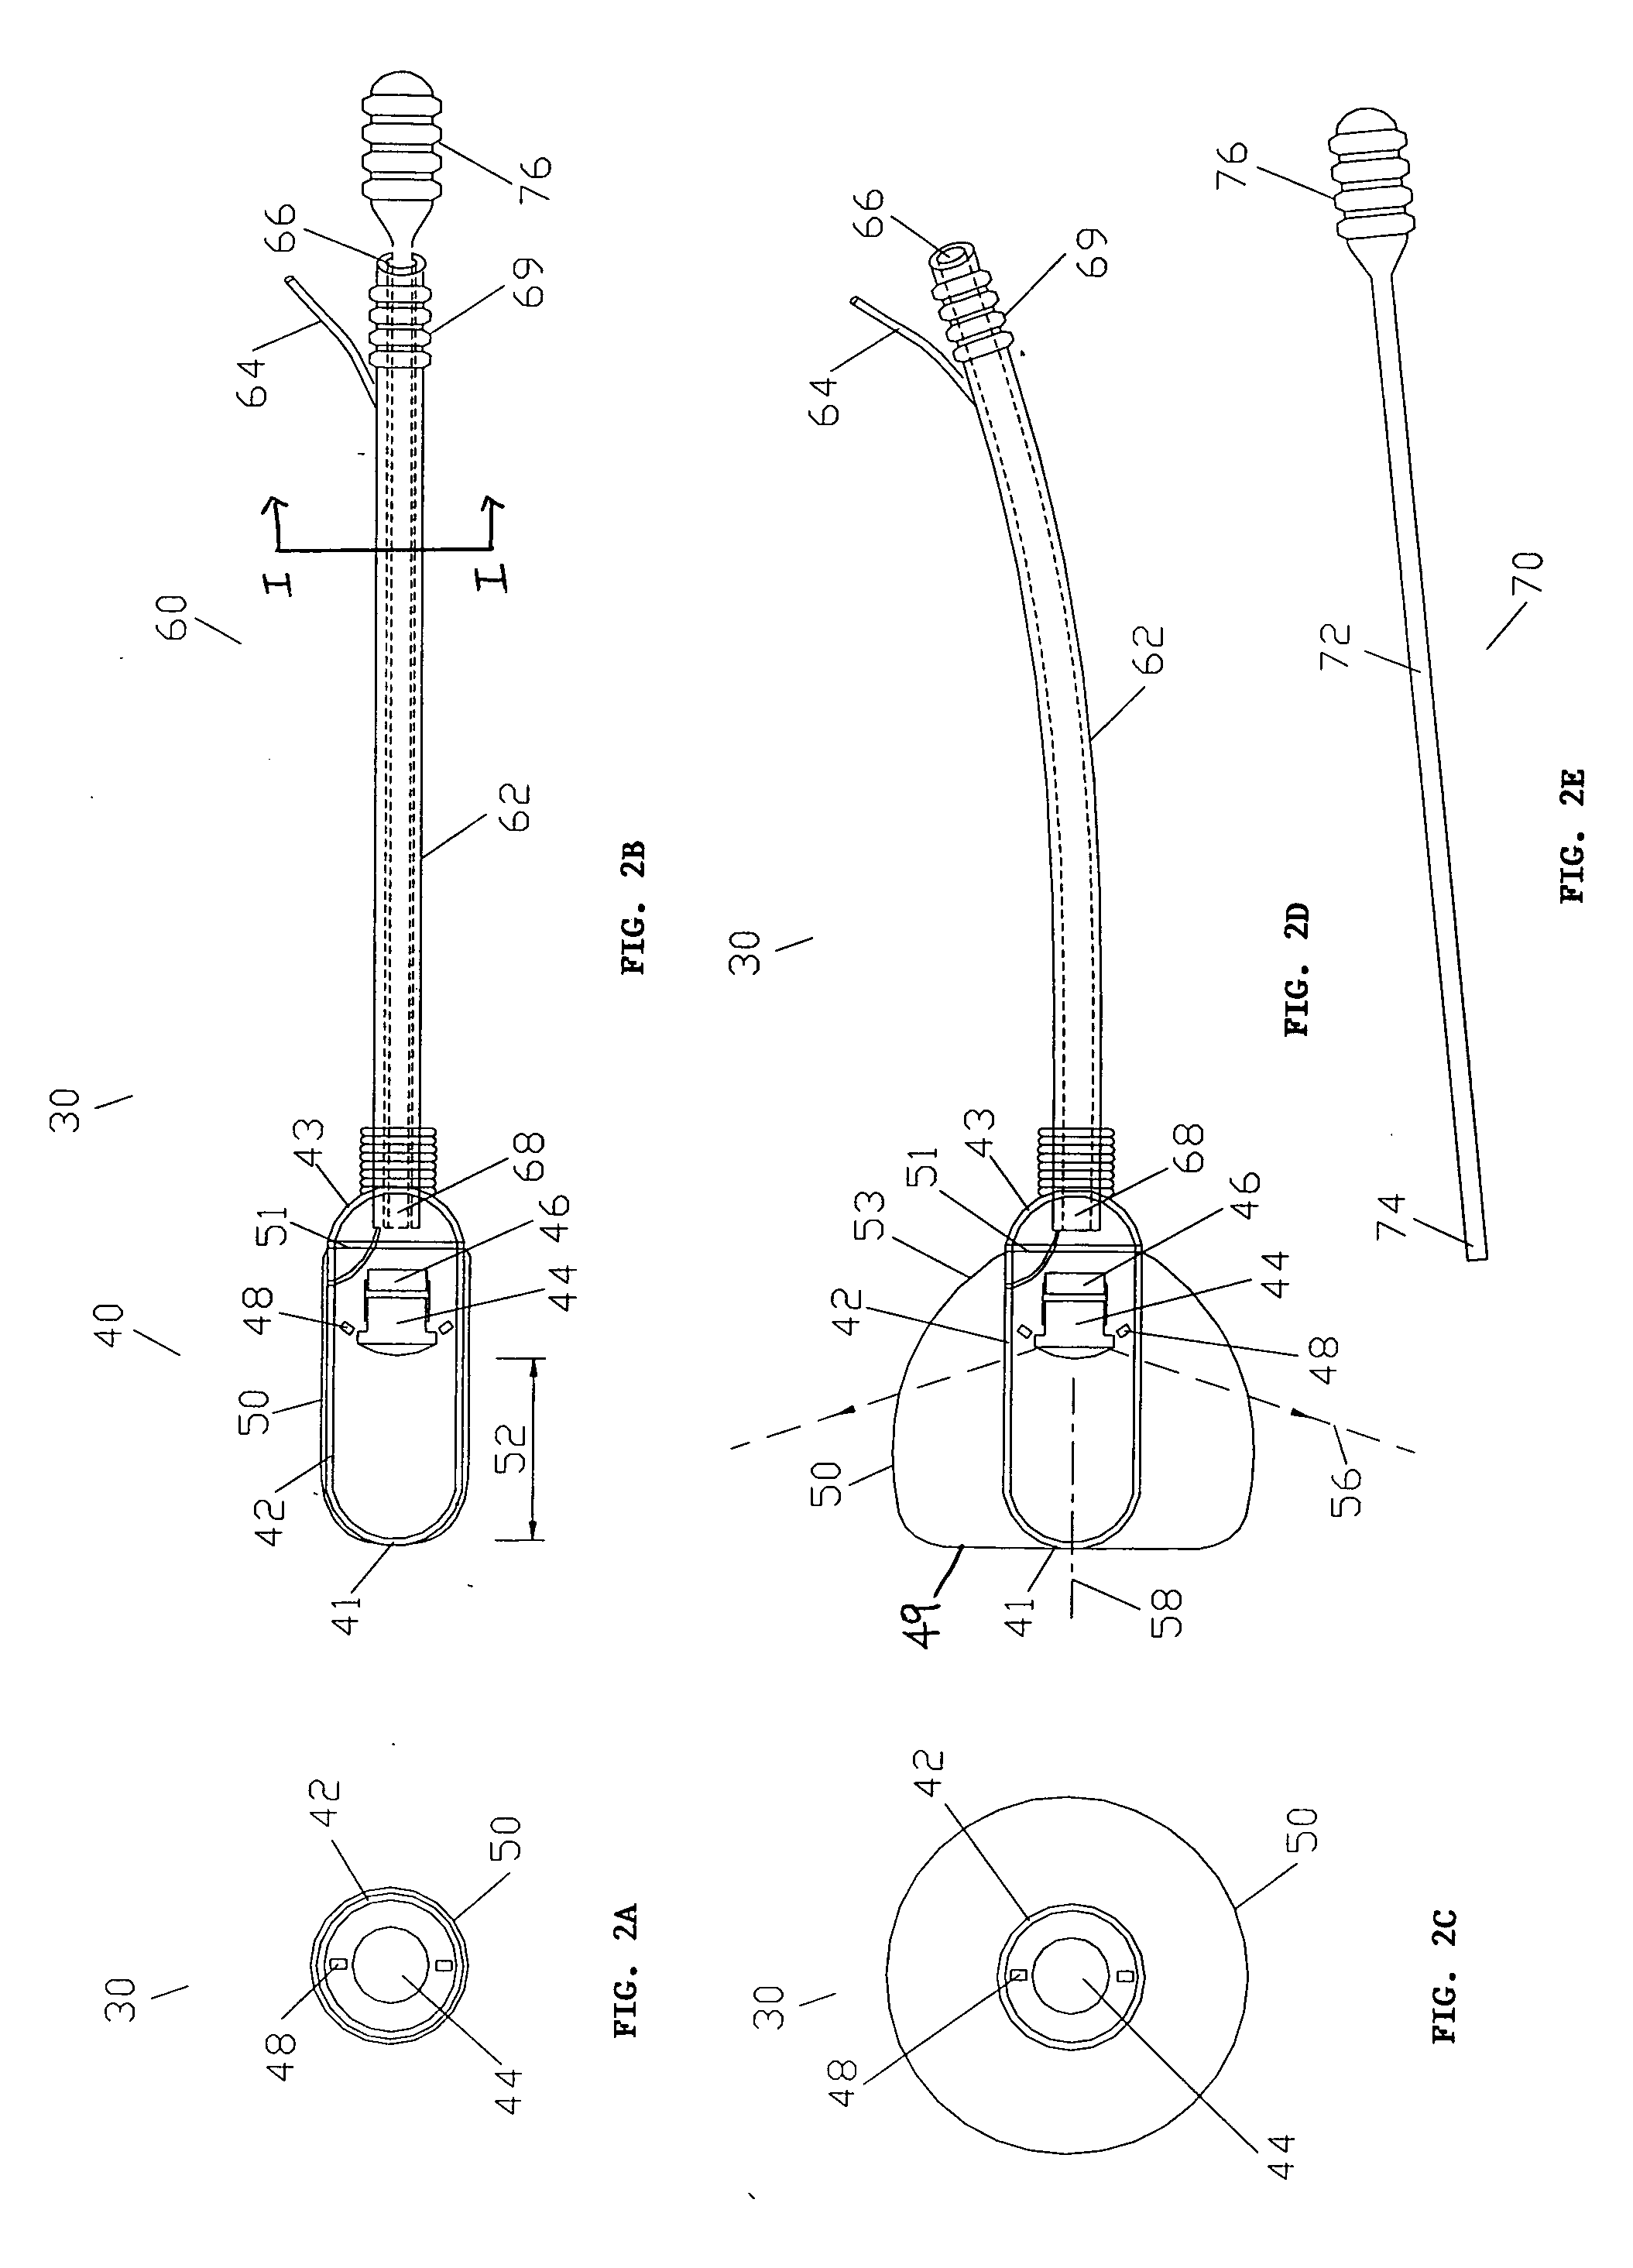 Cervix monitoring system and related devices and methods